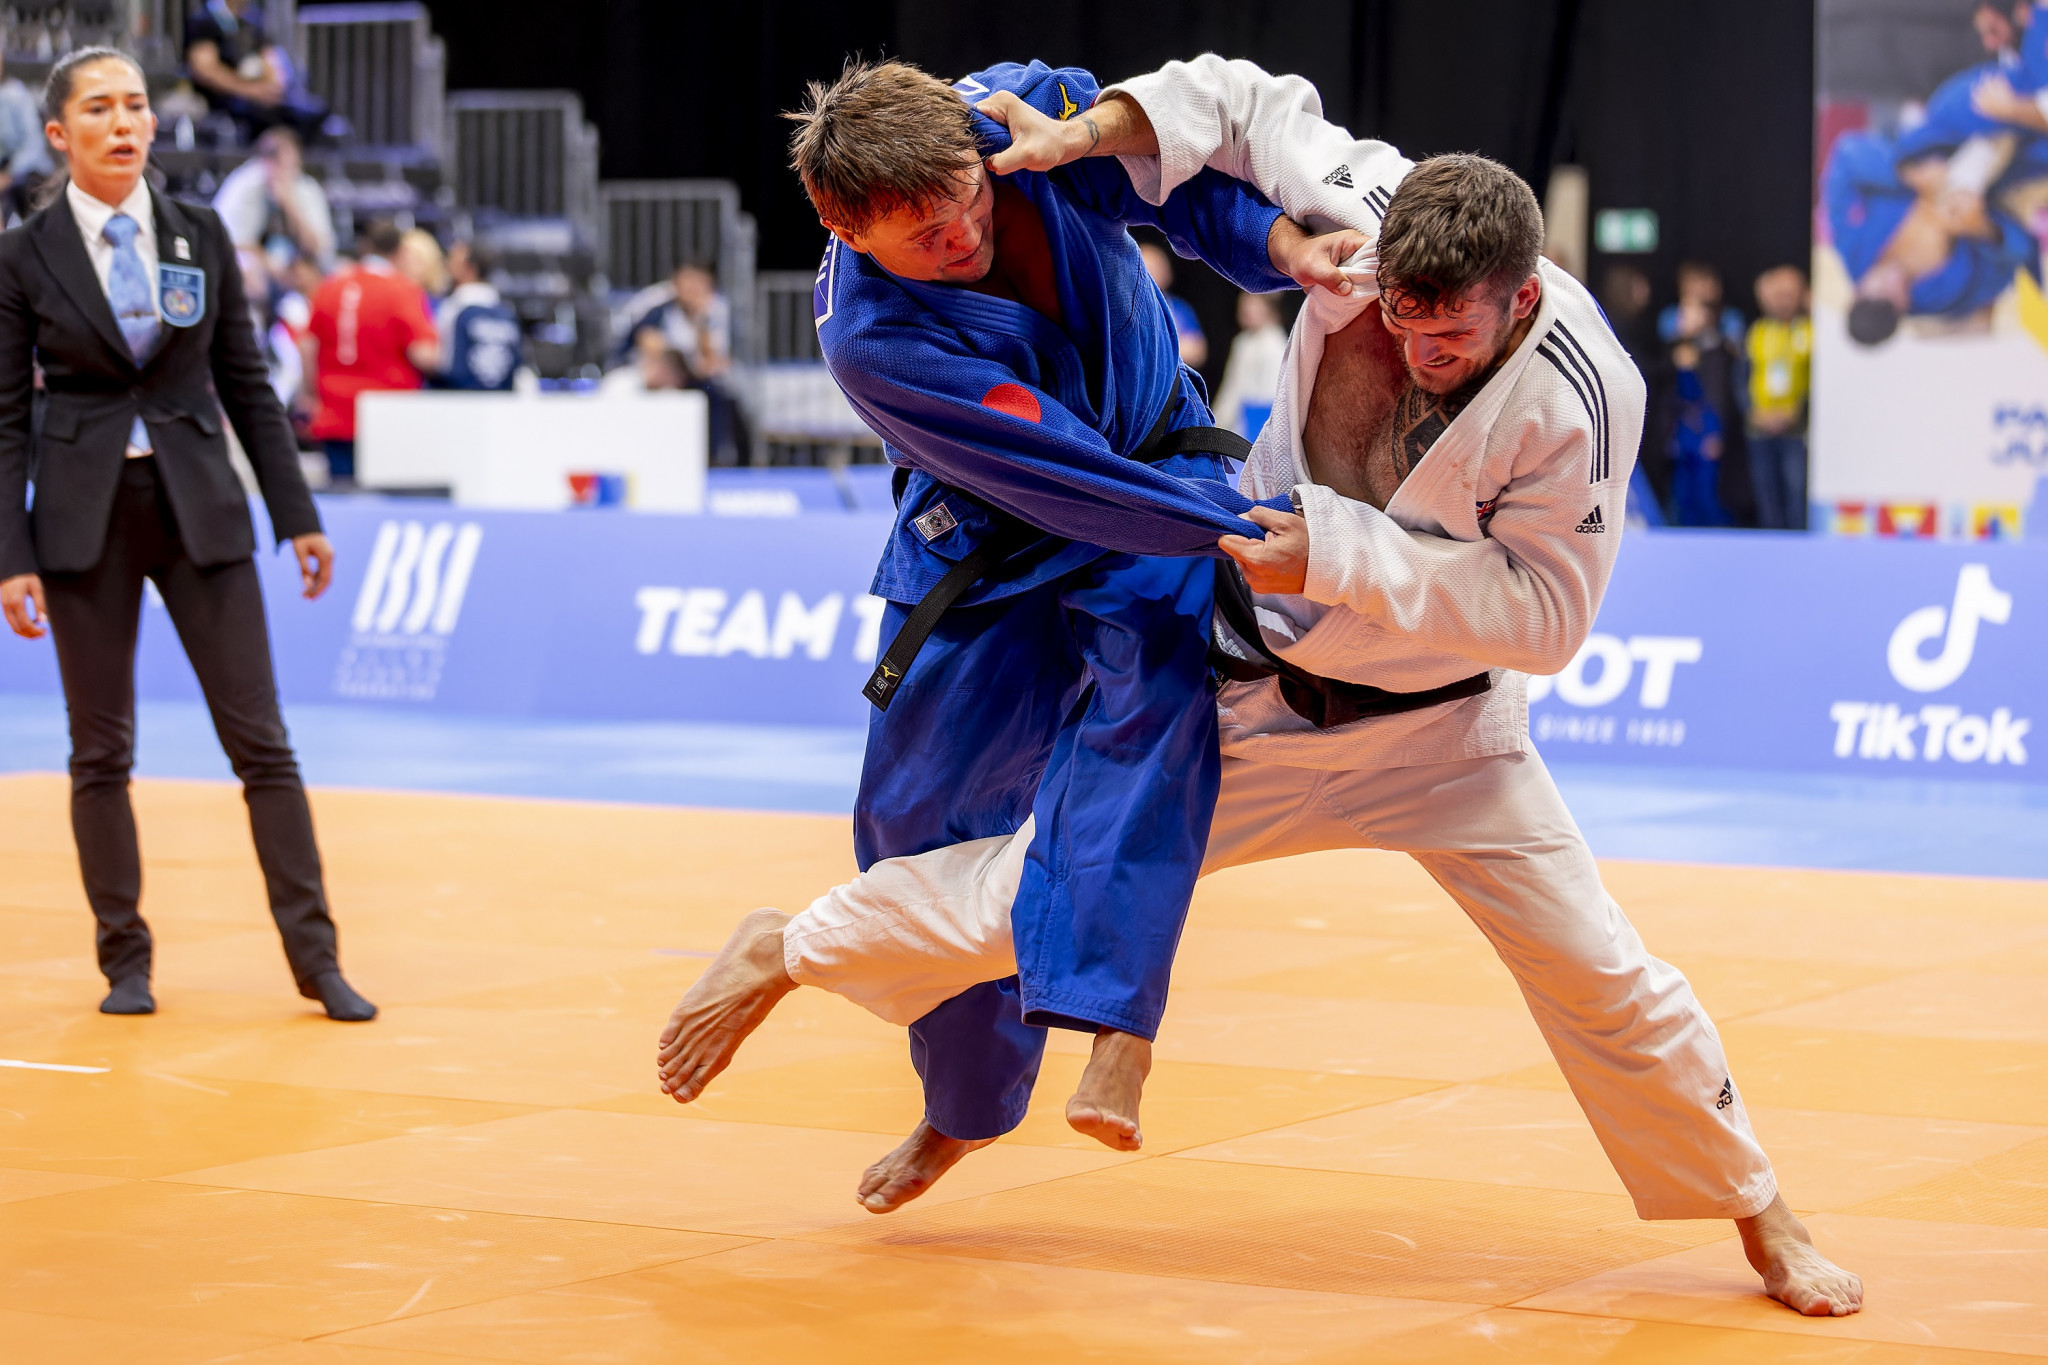 Oleg Crețul, left in blue, the 48-year-old Moldovan, did enough to beat Britain's Daniel Powell in the J1 men’s over-90kg final ©EPC